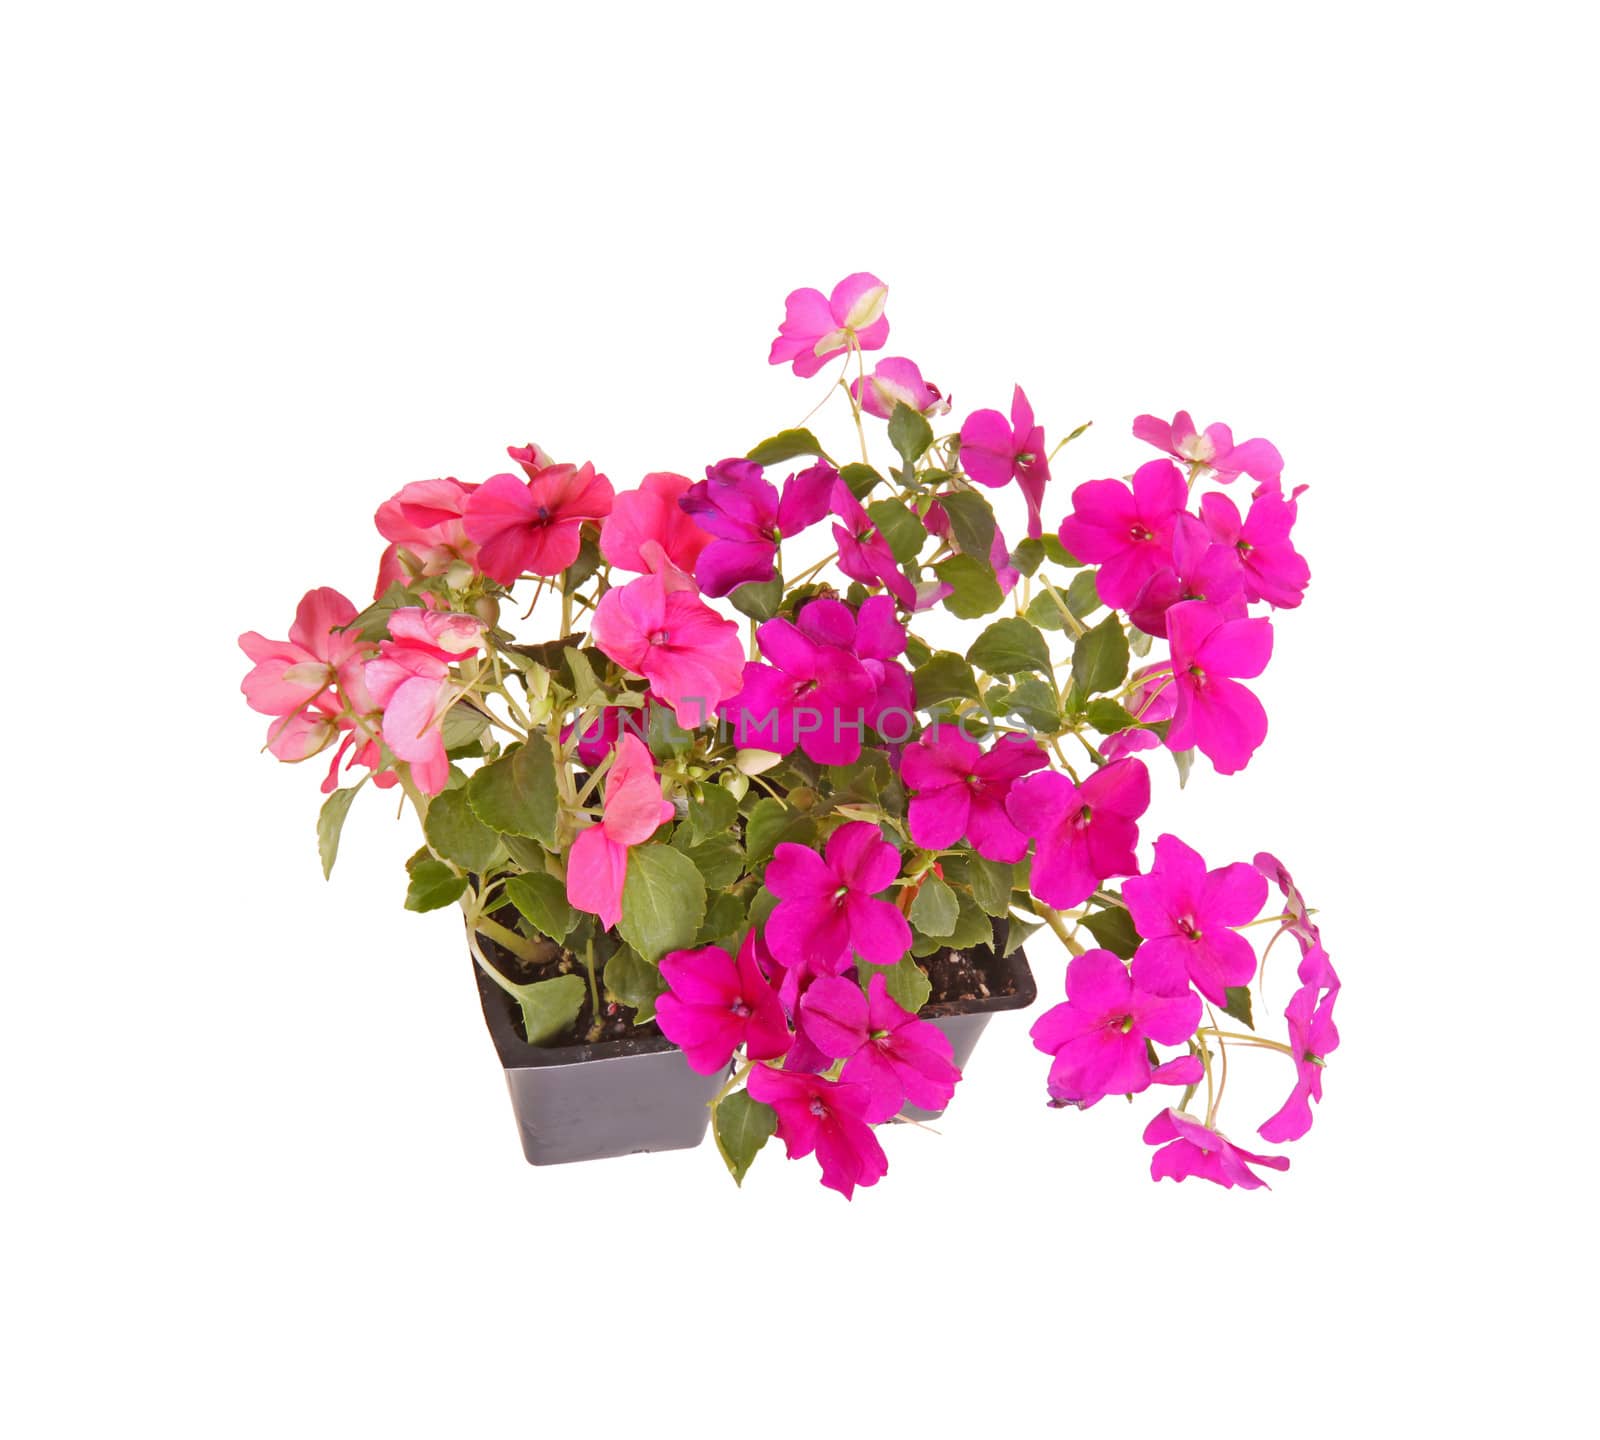 Pack containing two seedlings of impatiens plants (Impatiens wallerana) flowering in pink and purple ready for transplanting into a home garden isolated against a white background